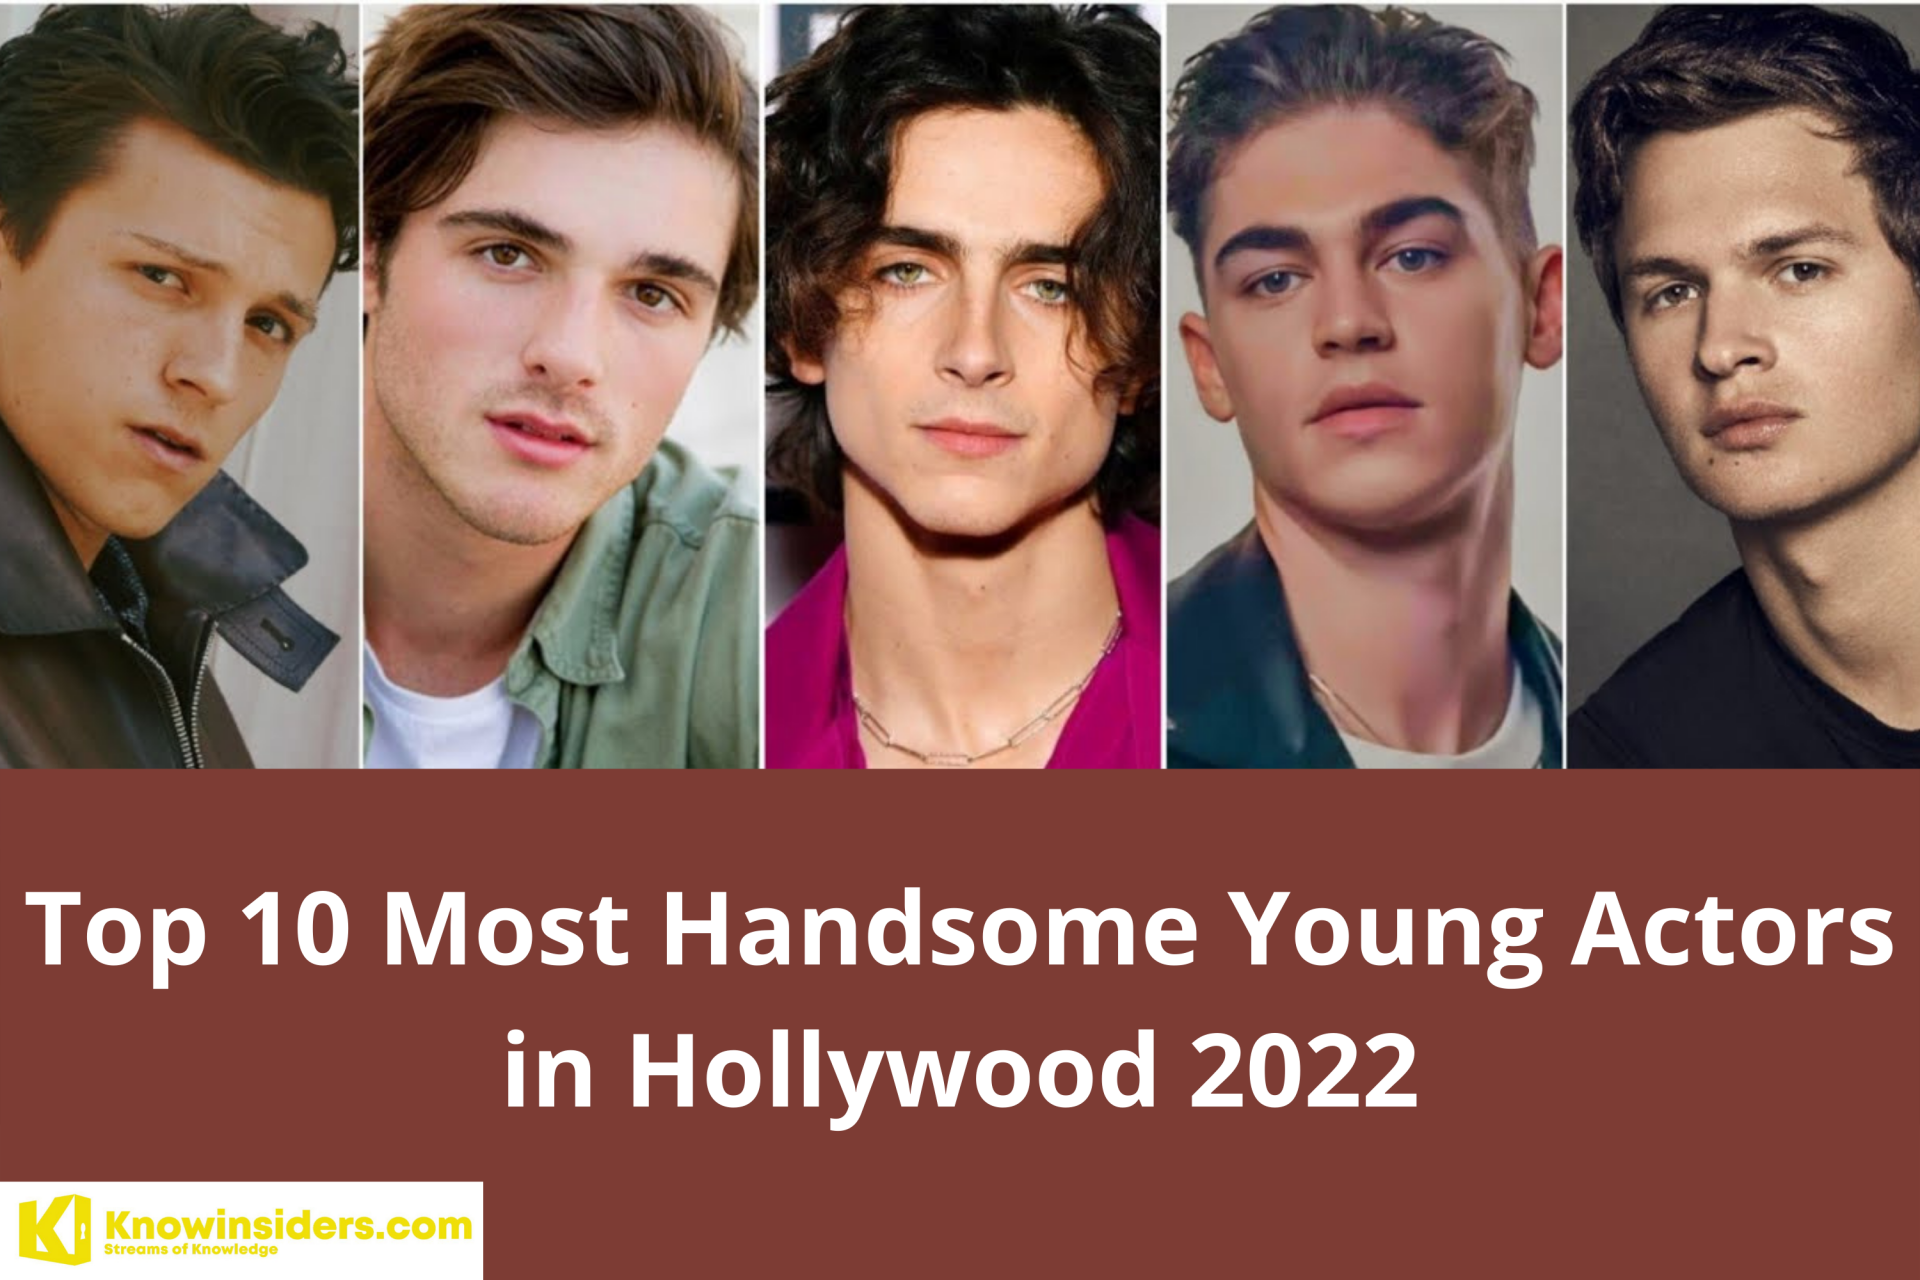 Top 10 Most Handsome Young Actors in Hollywood Today